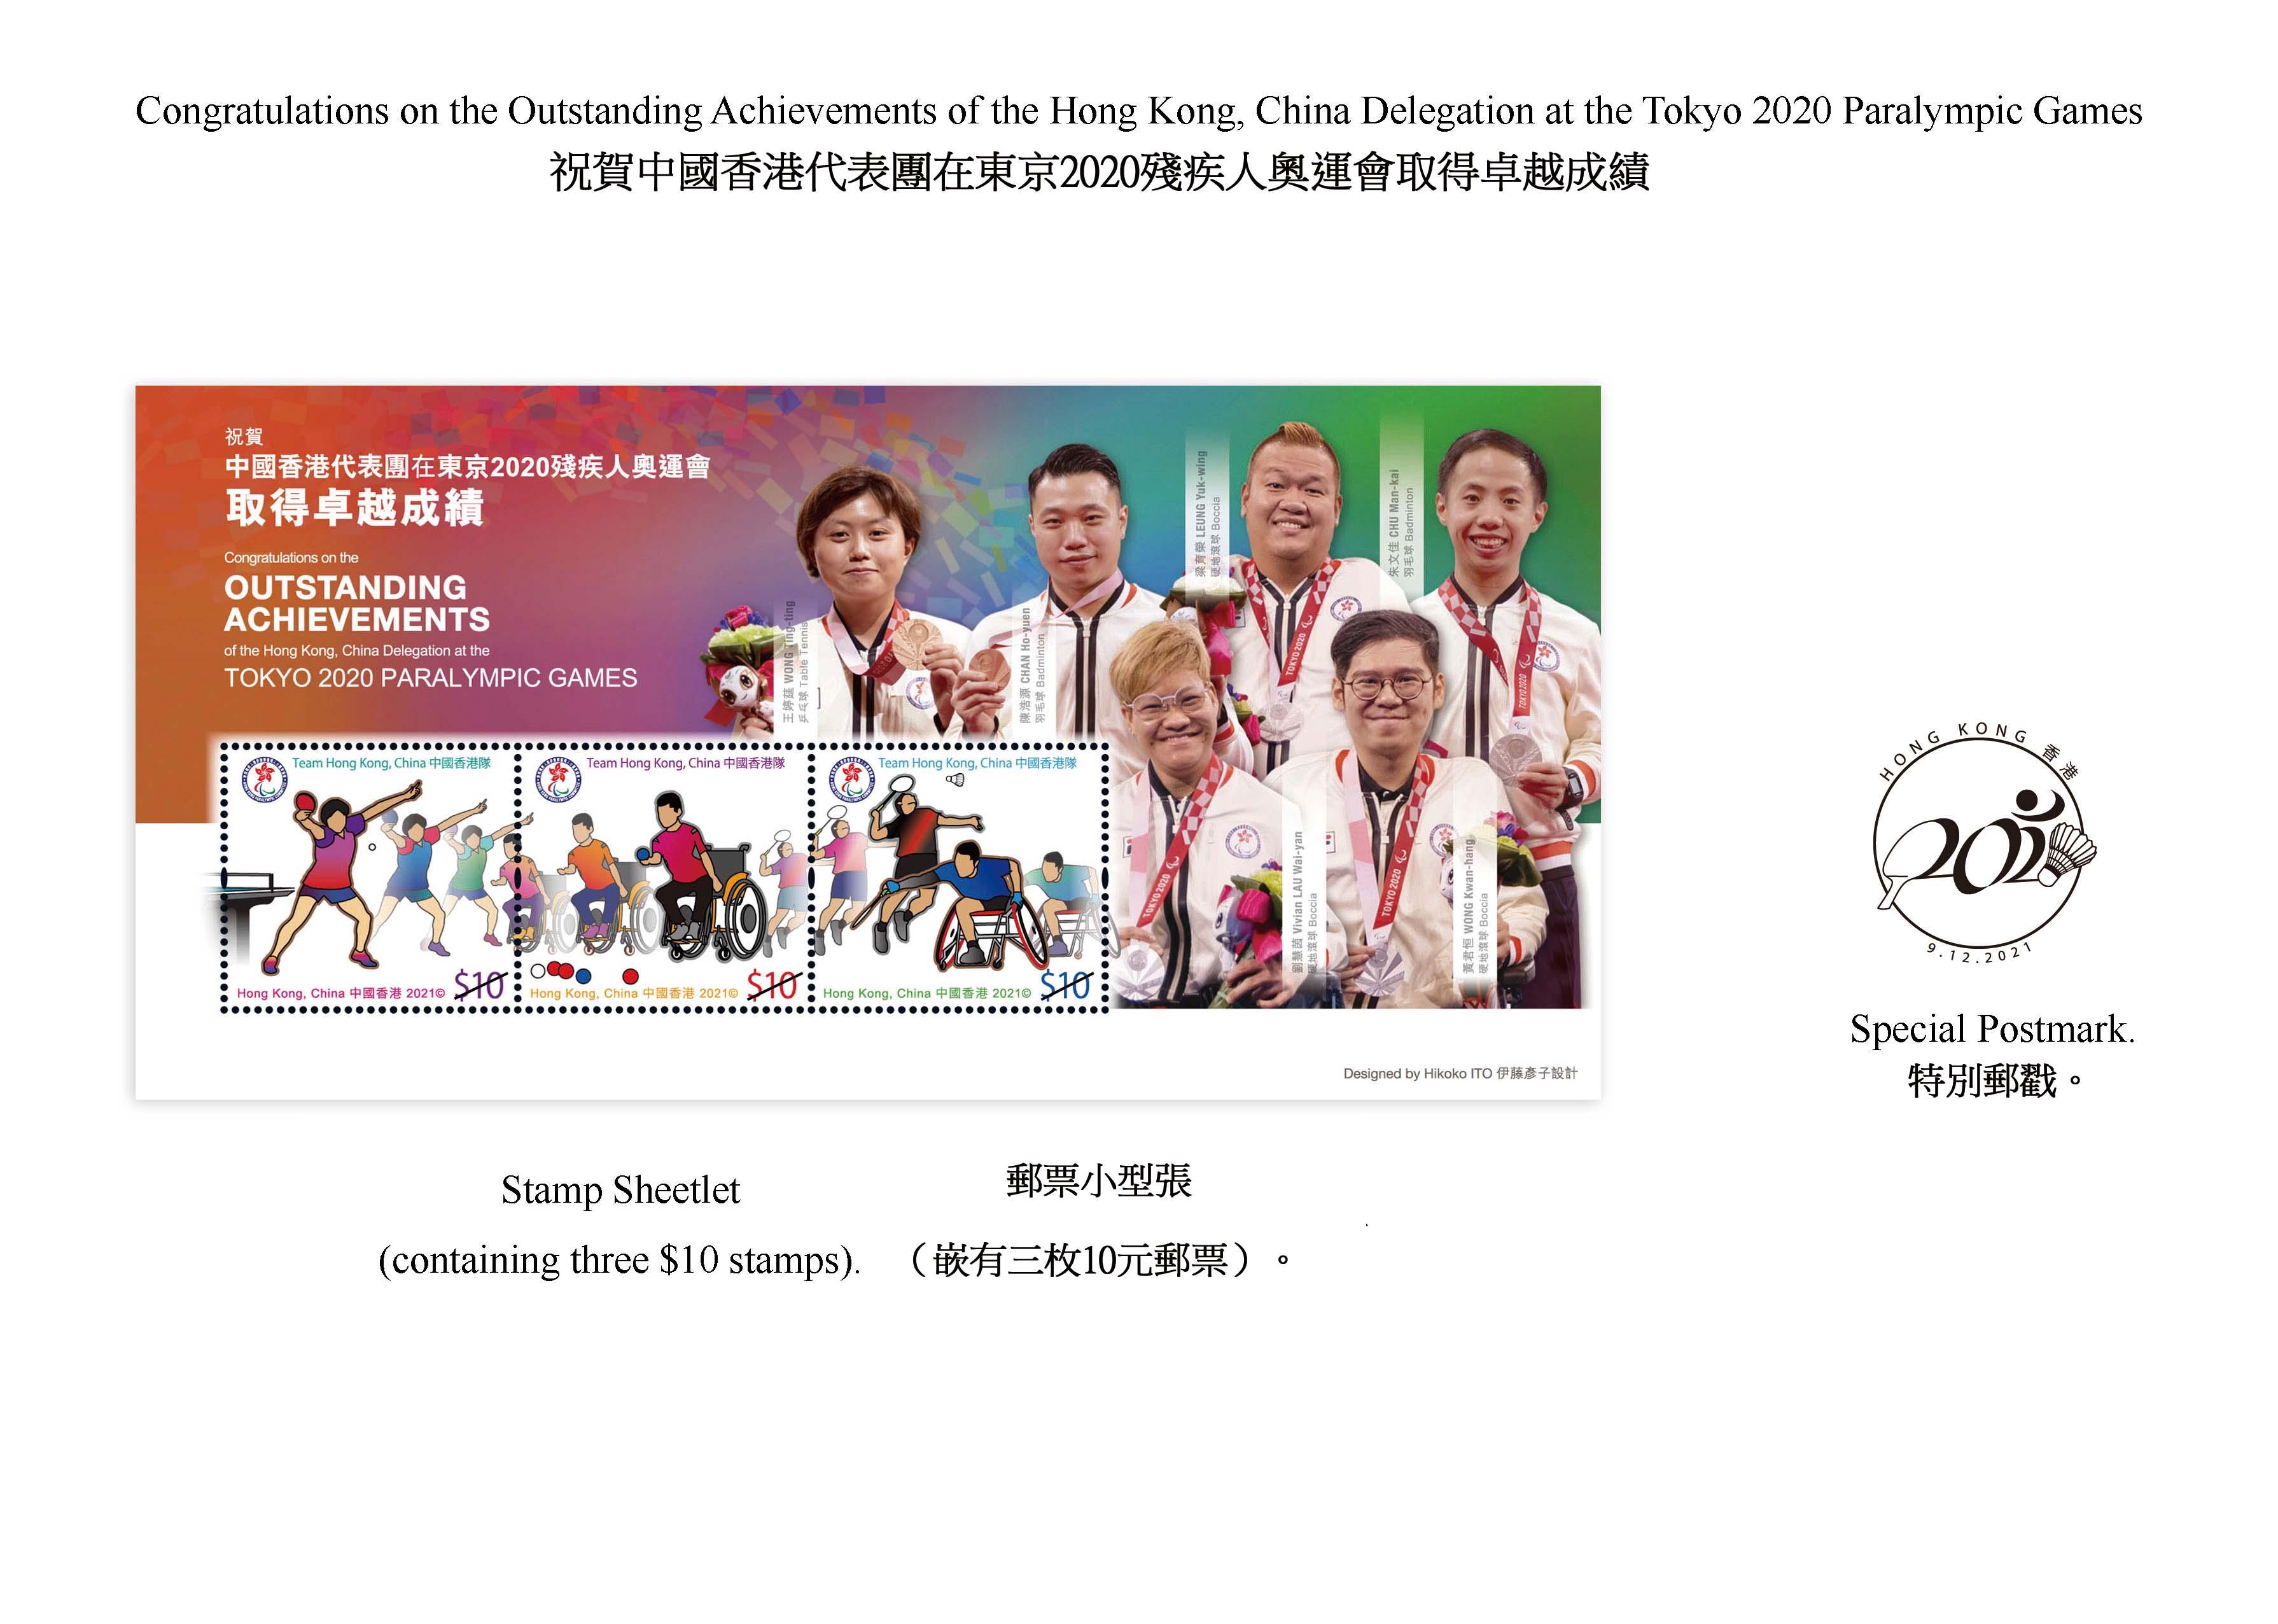 Hongkong Post will launch a special stamps issue and associated philatelic products with the theme "Congratulations on the Outstanding Achievements of the Hong Kong, China Delegation at the Tokyo 2020 Paralympic Games" on December 9 (Thursday). Photo shows the stamp sheetlet and special postmark.
